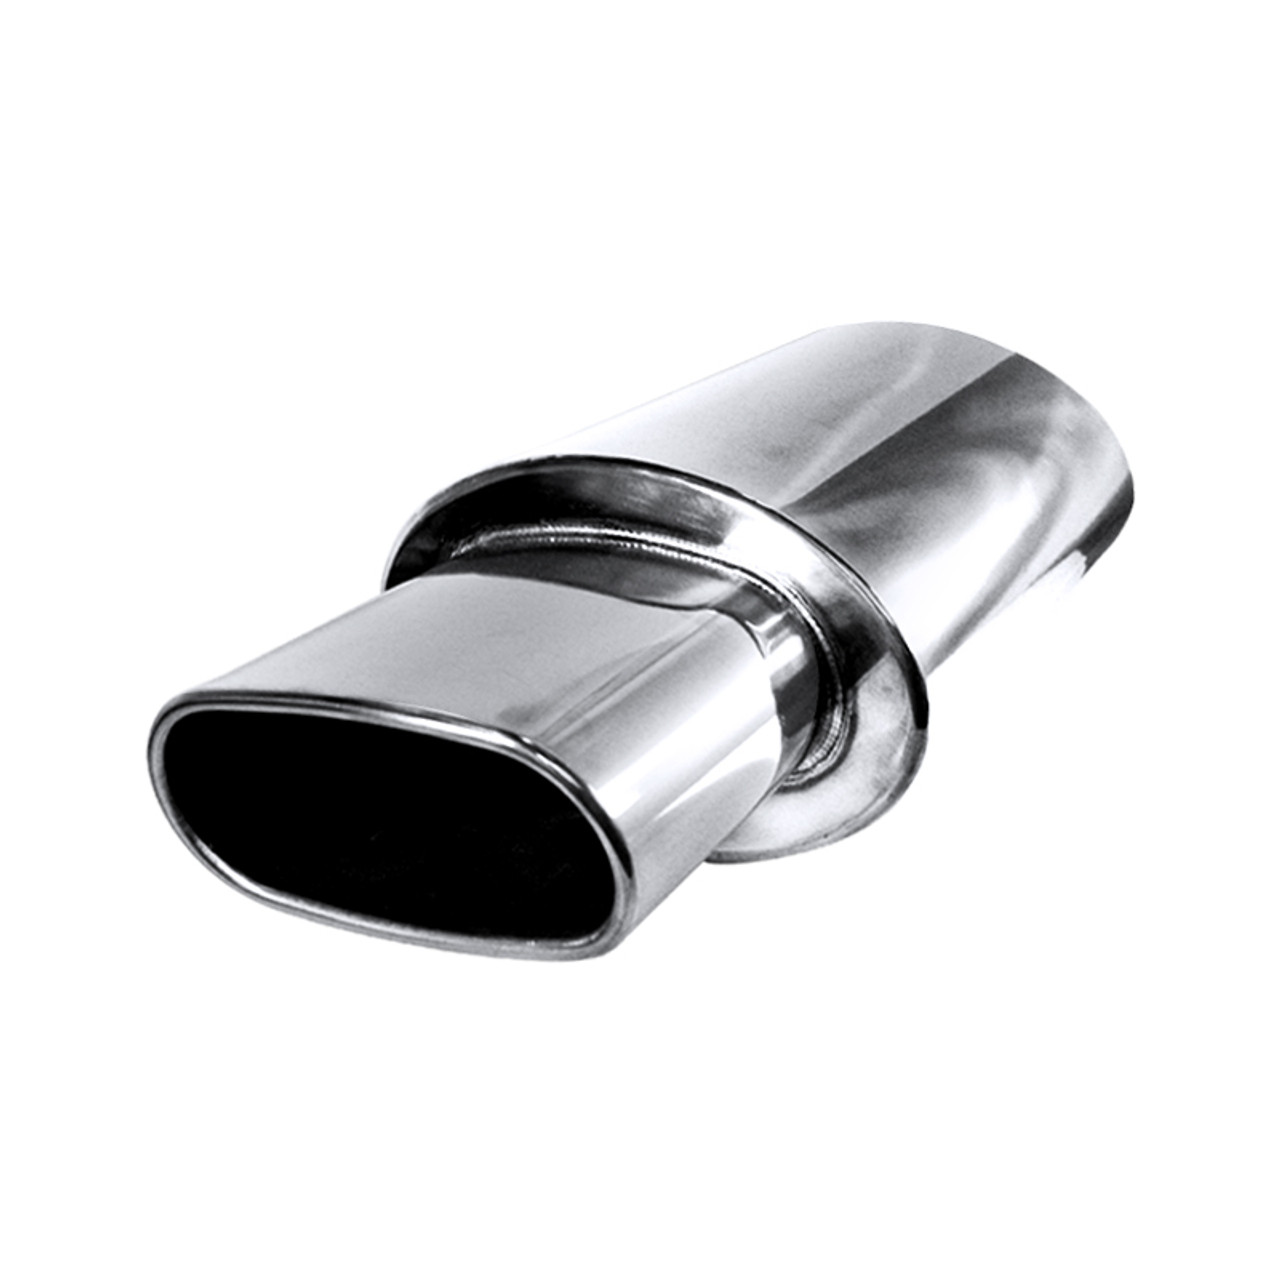 Automaze Universal Fit Car Exhaust Tail Muffler Tip Show Pipe 63mm, Curved  Oval, Stainless Steel(Model-A88)